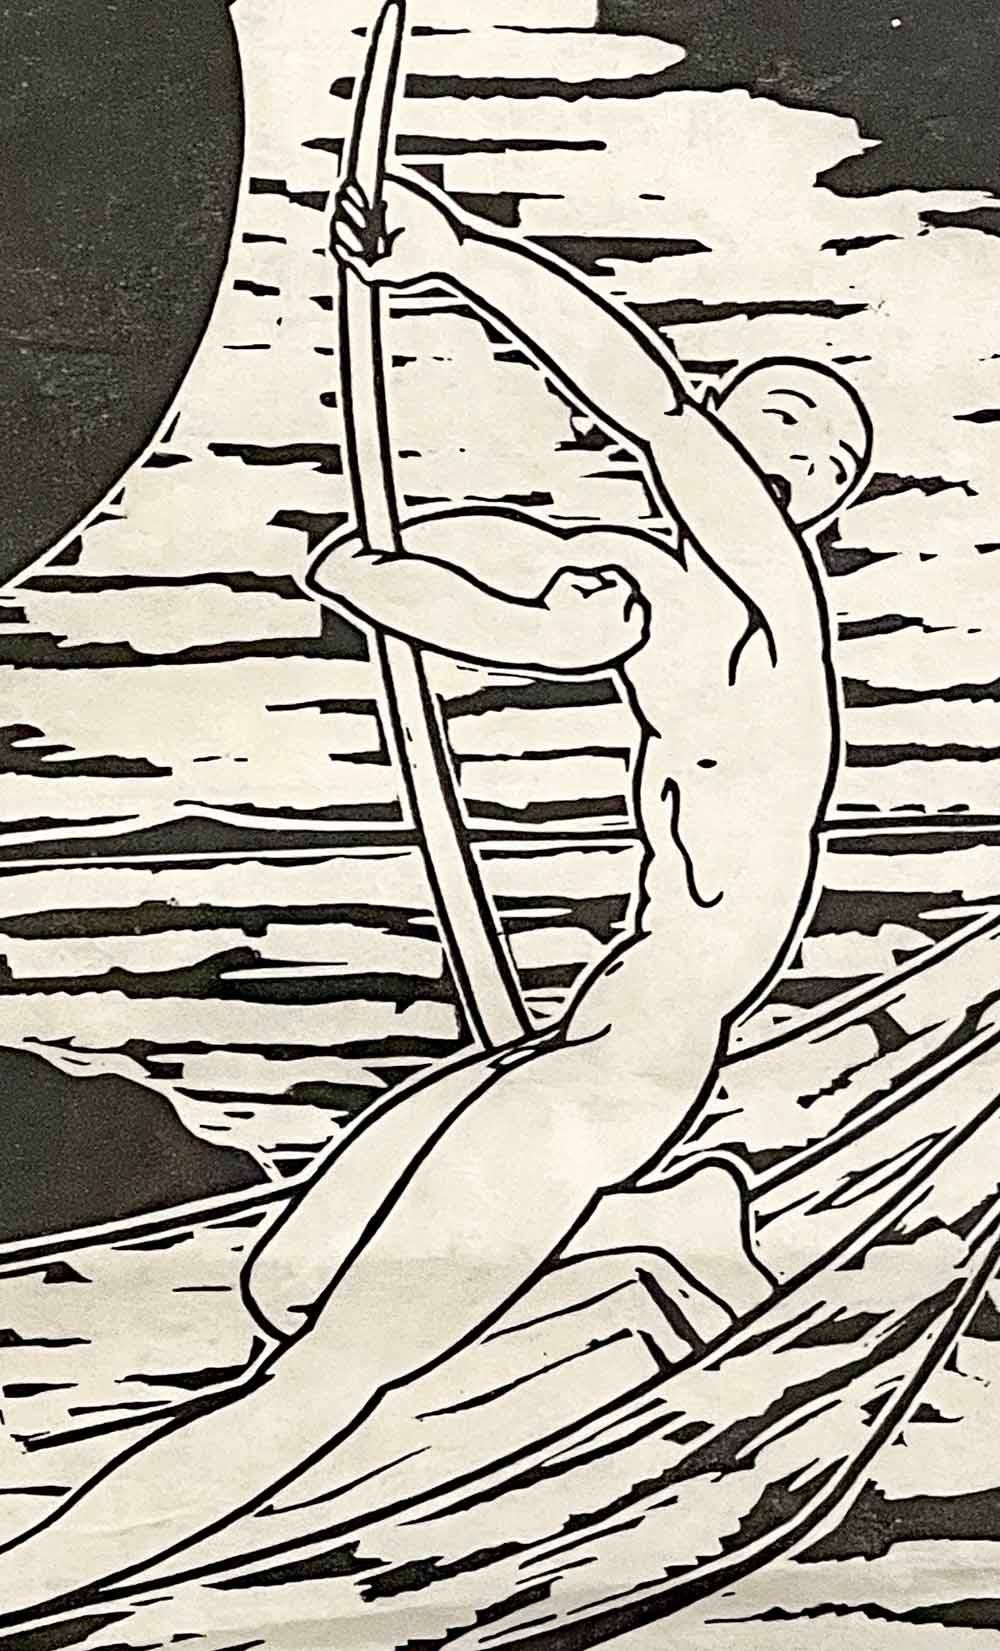 This rare and striking woodcut print by Robert Pajer-Gartegen, an Austrian artist, depicts a nude male figure in a slender wood boat, using a long pole to move forward in the moonlight.  The image is both atmospheric and sensual, demonstrating the